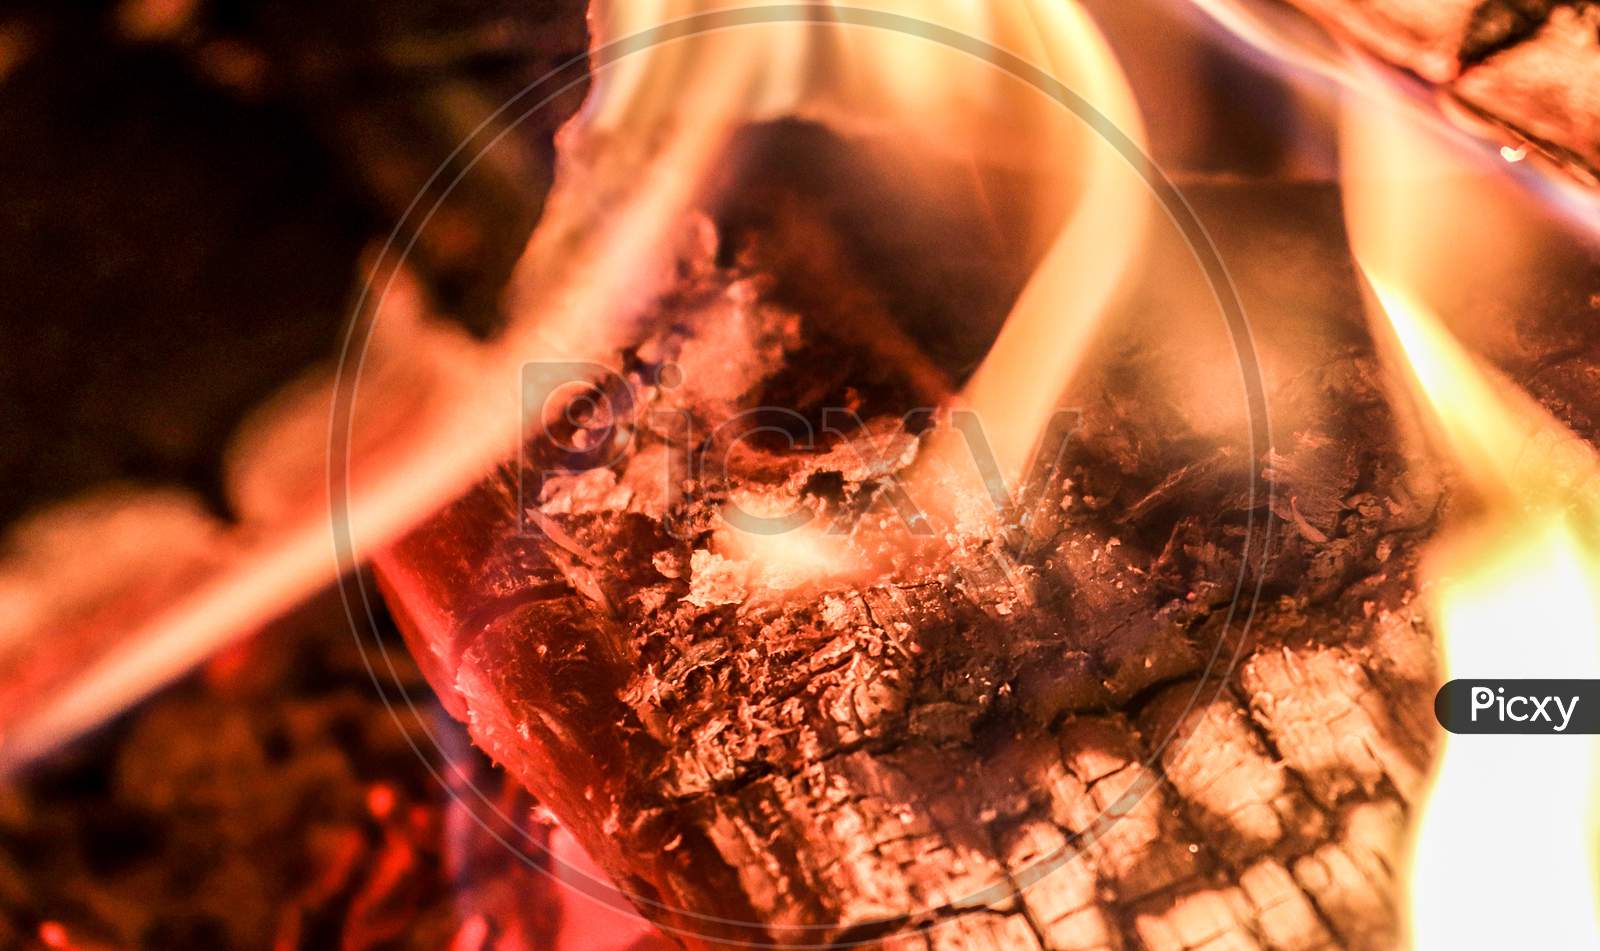 Close up of a hot burning fireplace with flames and glowing ember